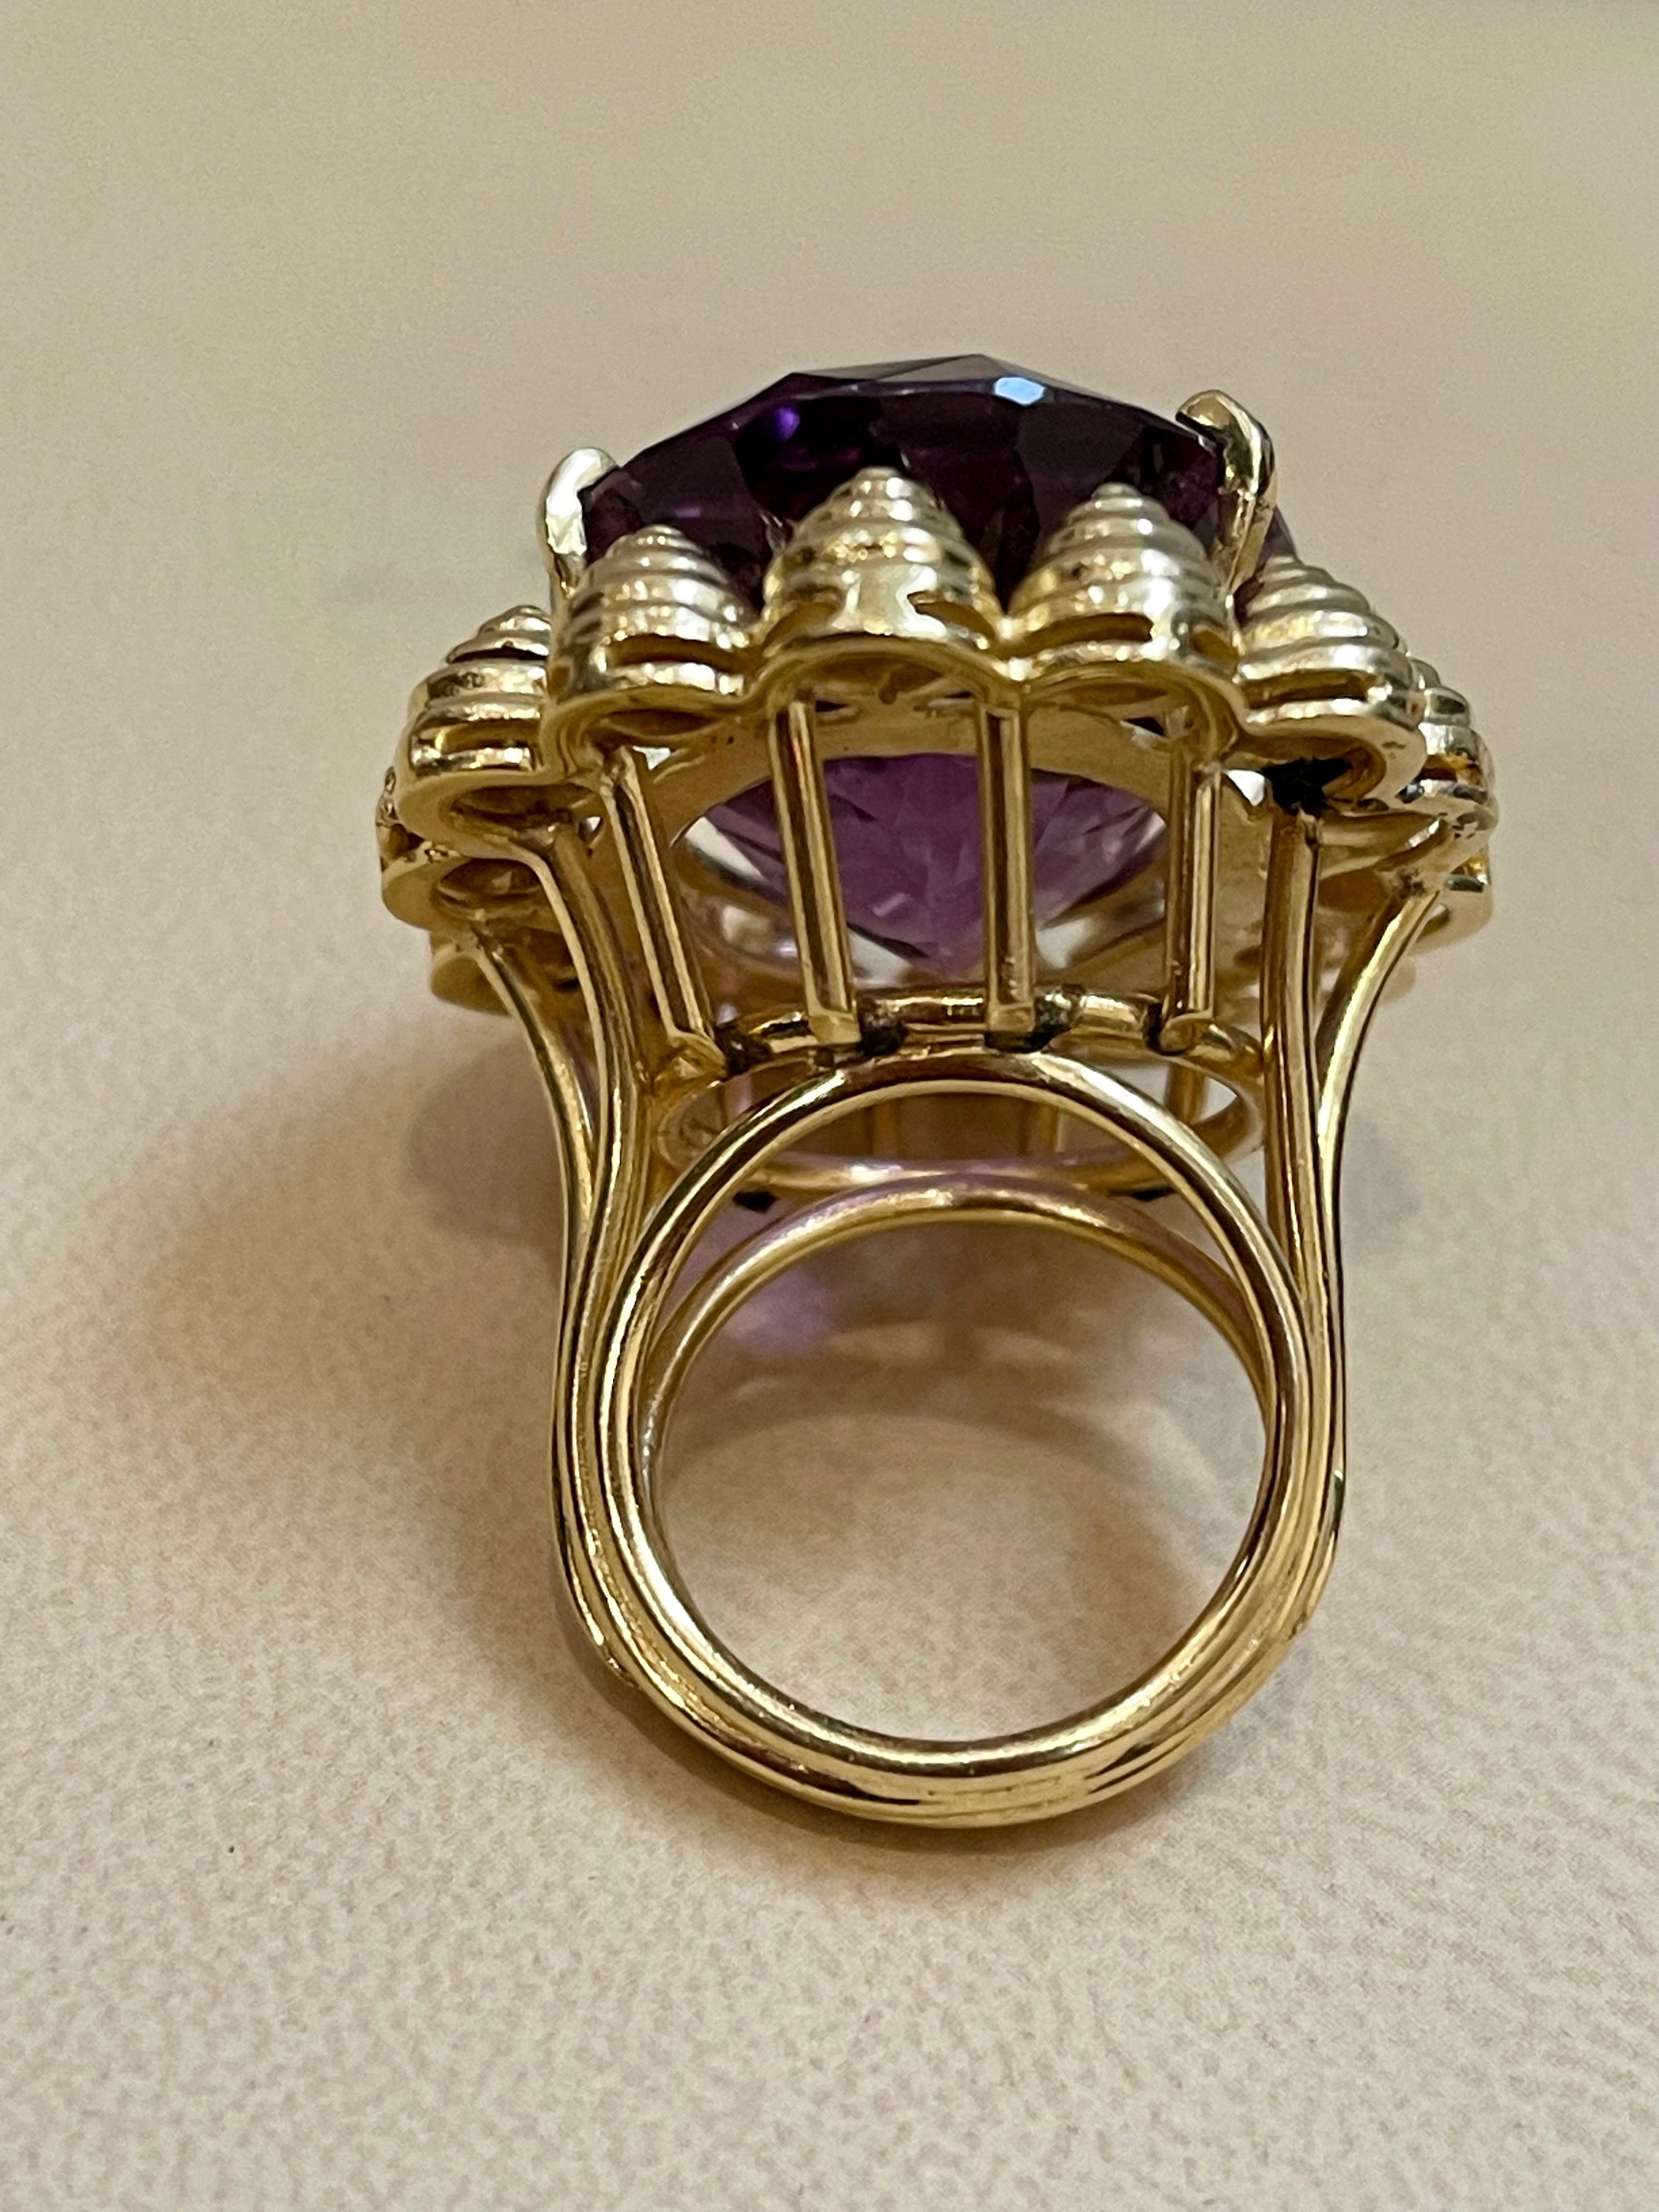 50 Carat Amethyst Cocktail Ring in Solid 18 Karat Yellow Gold 29 Grams For Sale 1